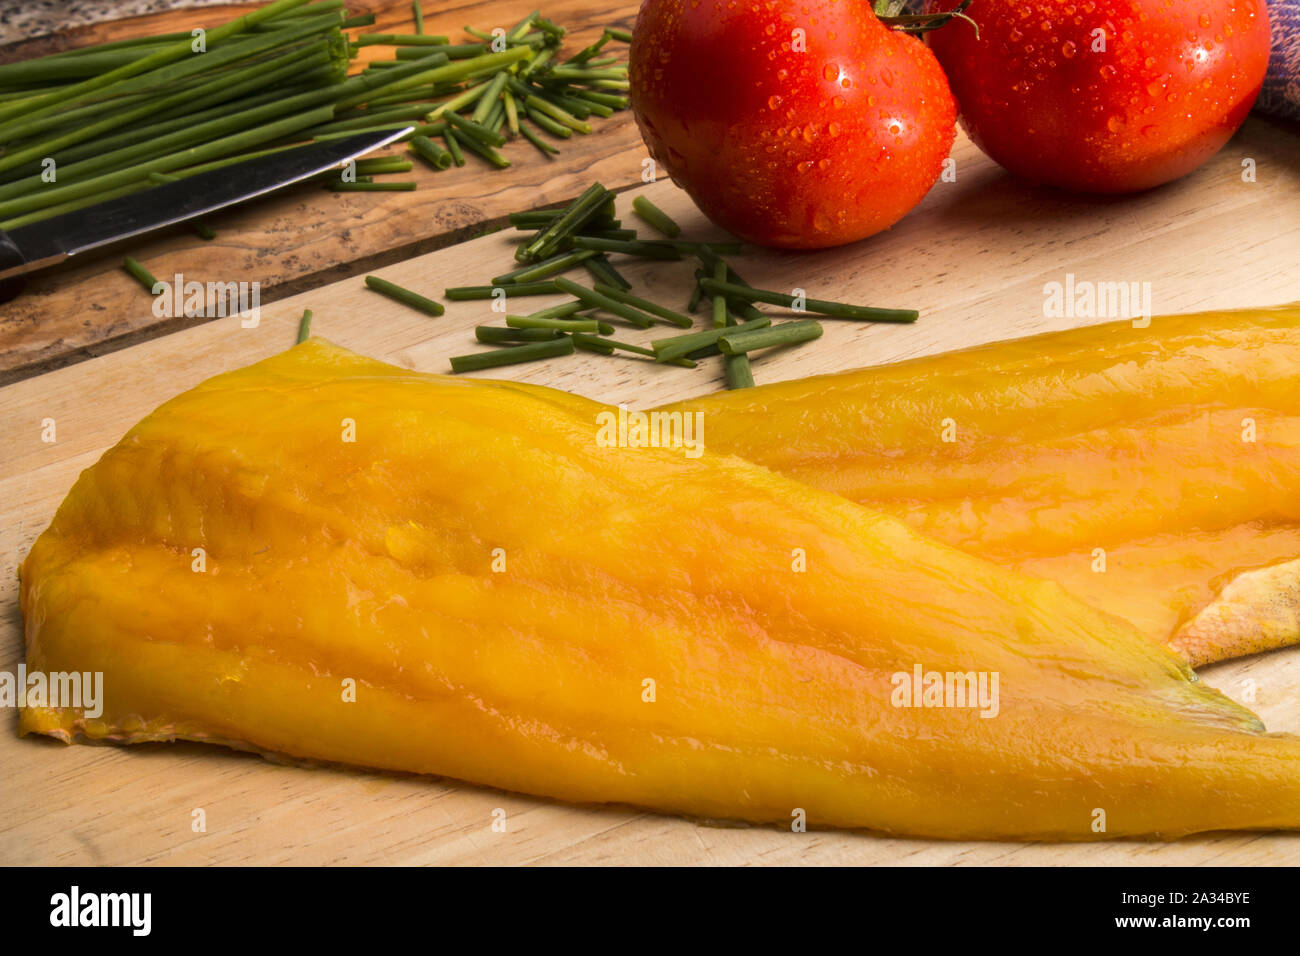 smoked haddock fillet on a wooden board, fresh tomato and chive in the background Stock Photo